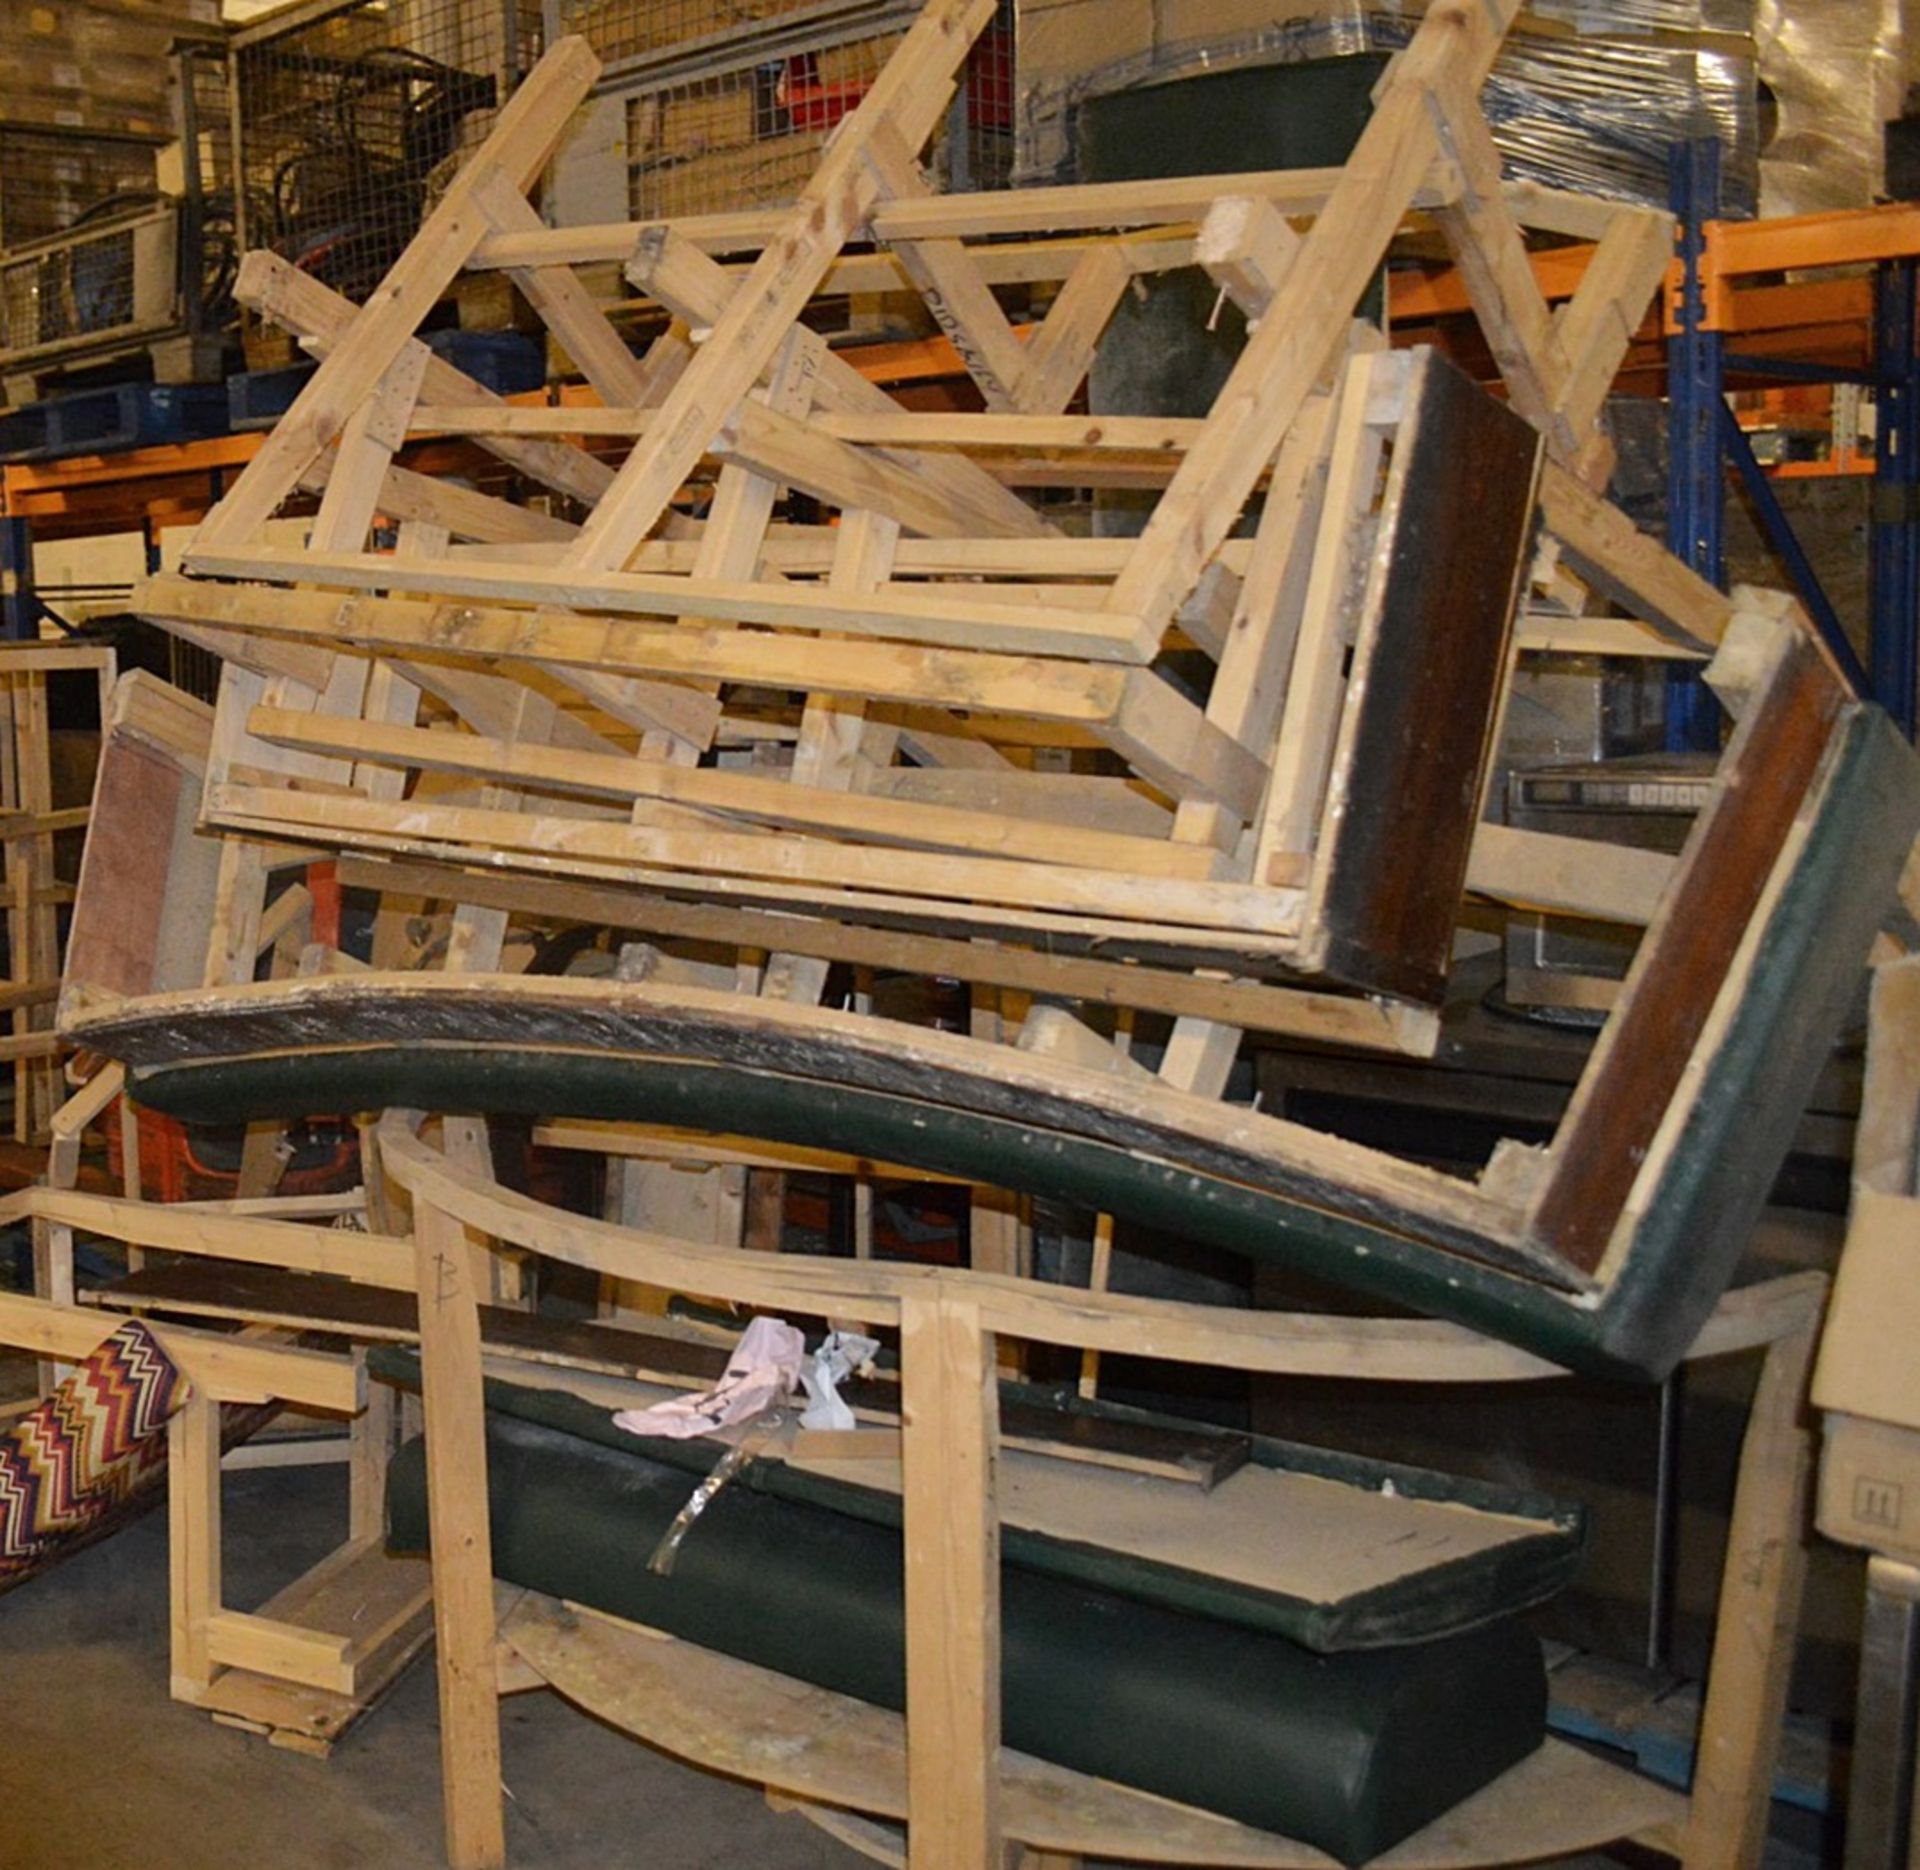 Large Assortment Of Commercial Restaurant Booth Seating - Includes Over 50 x Frames & 40 x Cushions